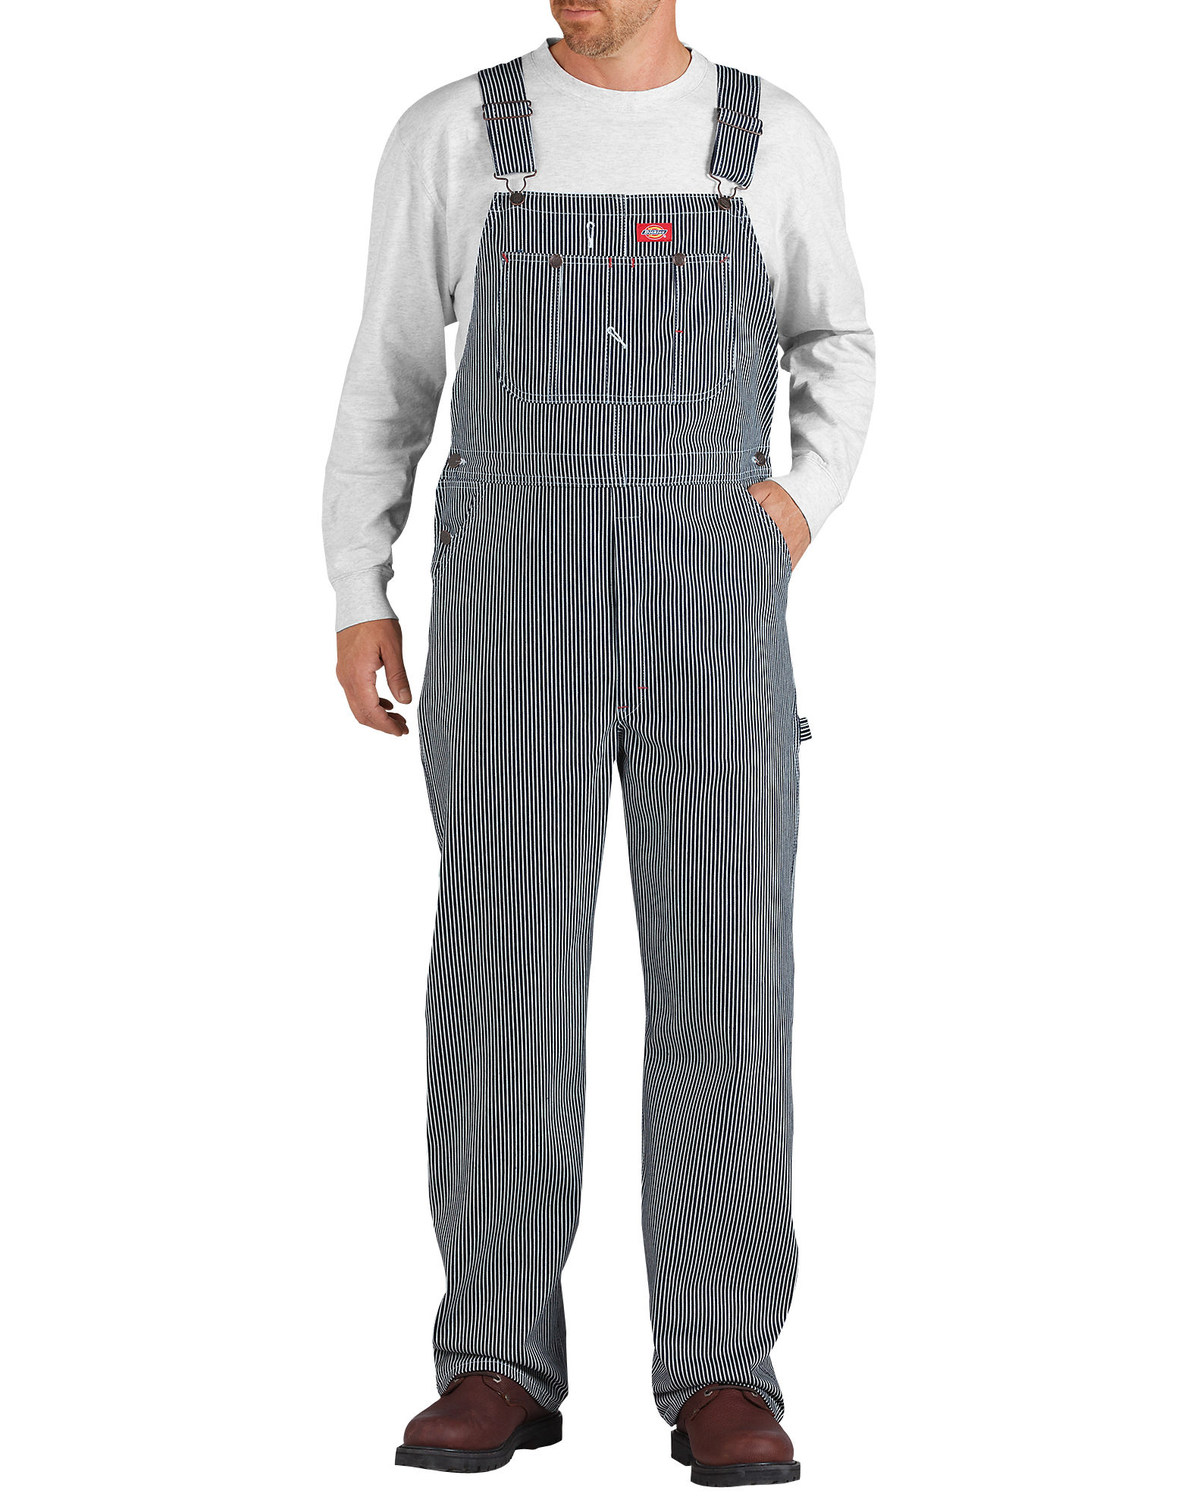 Dickies ® Hickory Stripe Overalls - Big & Tall